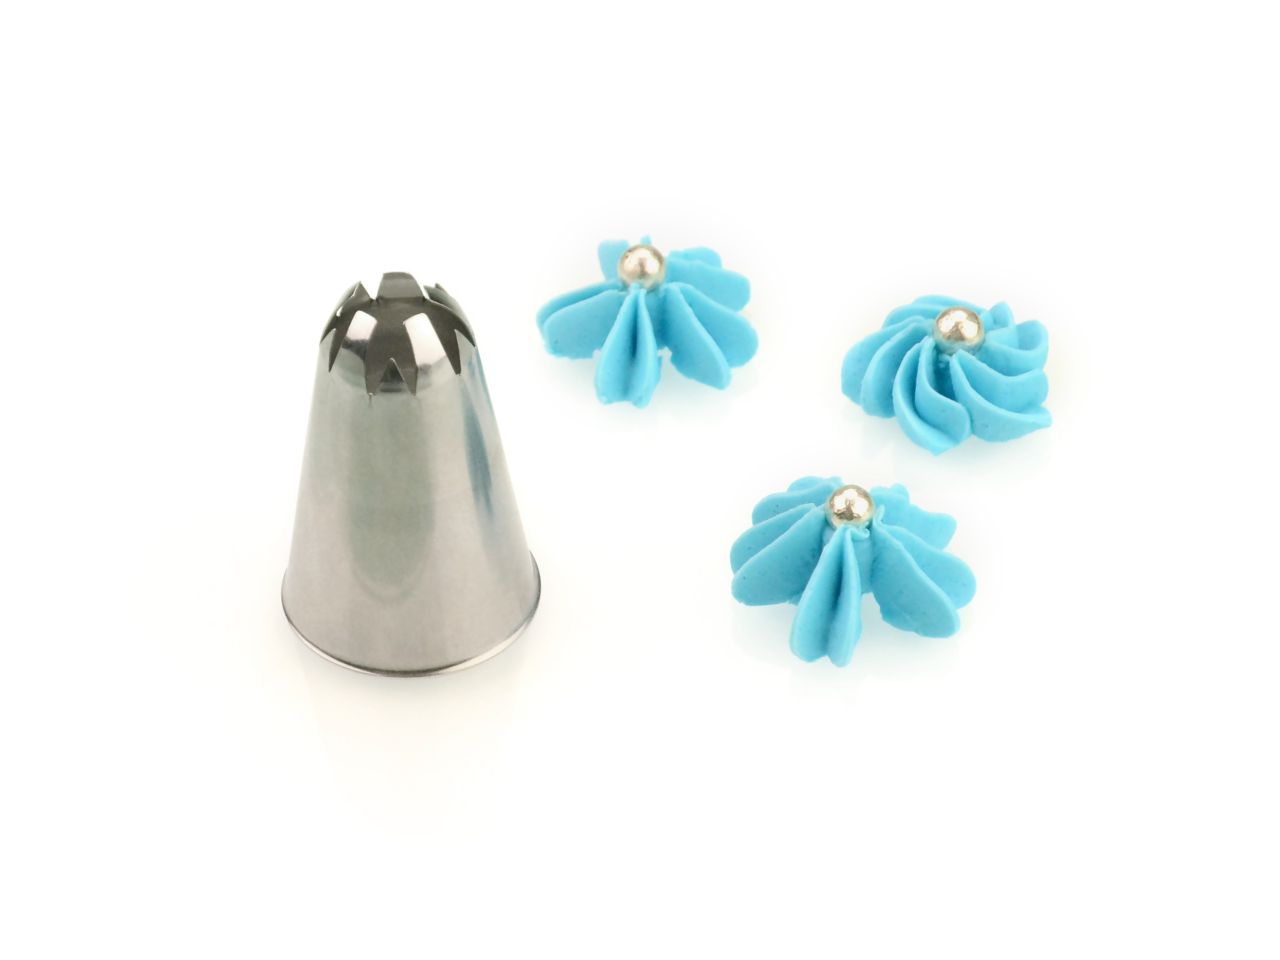 Nozzle flower 6mm stainless steel